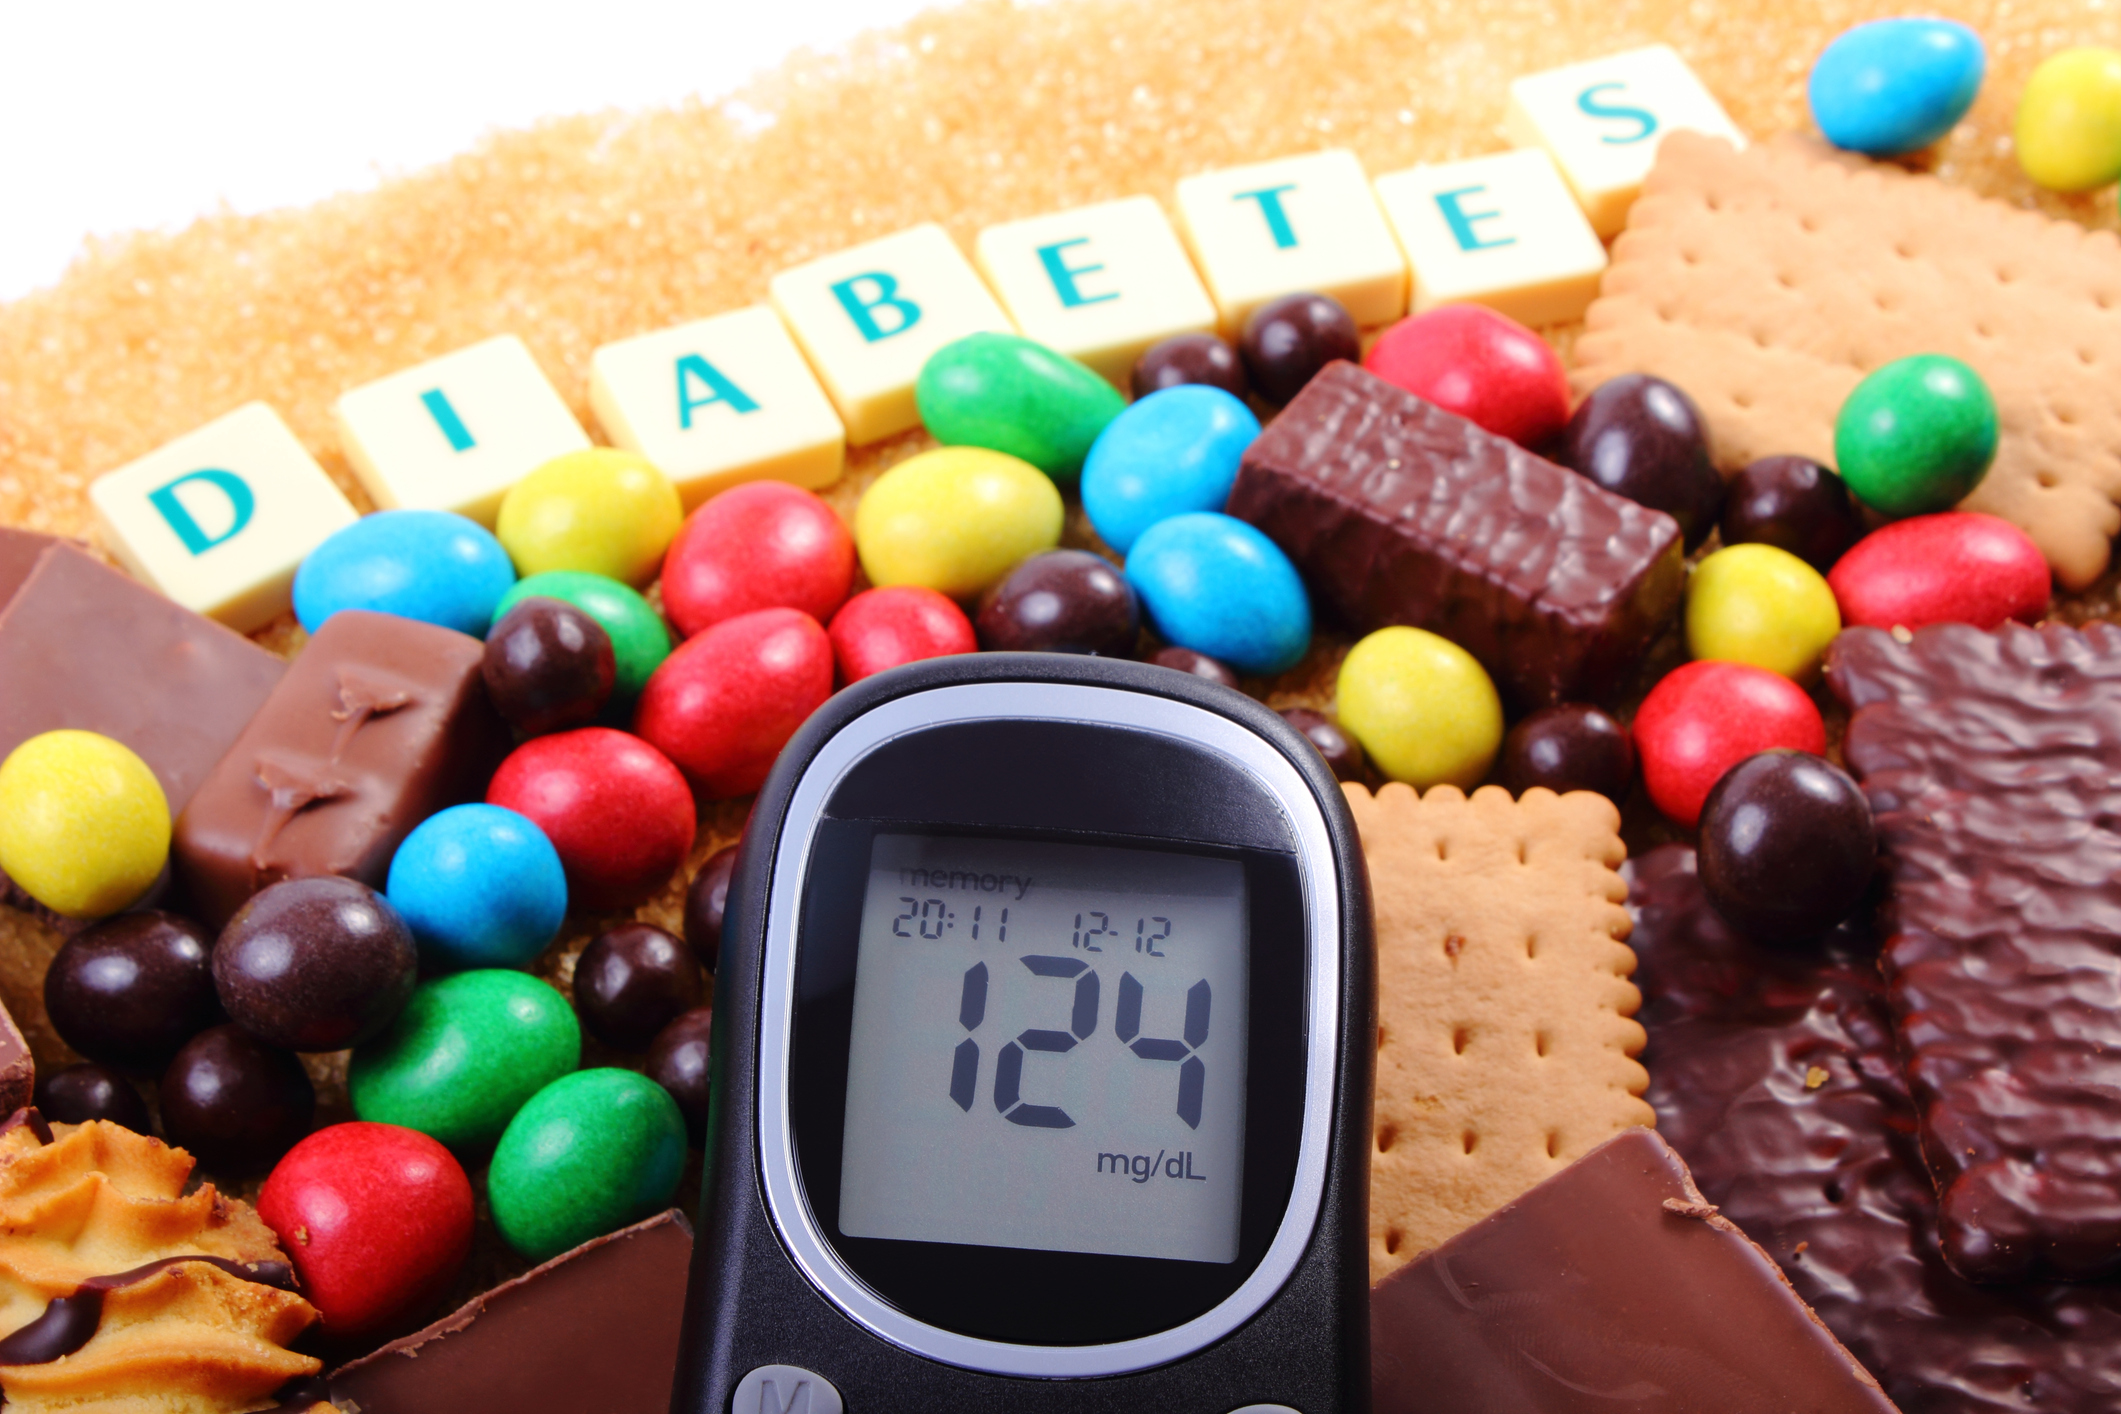 Glucose meter with word diabetes, heap of candies, cookies and brown cane sugar, too many sweets, unhealthy food, concept of diabetes and reduction of eating sweets